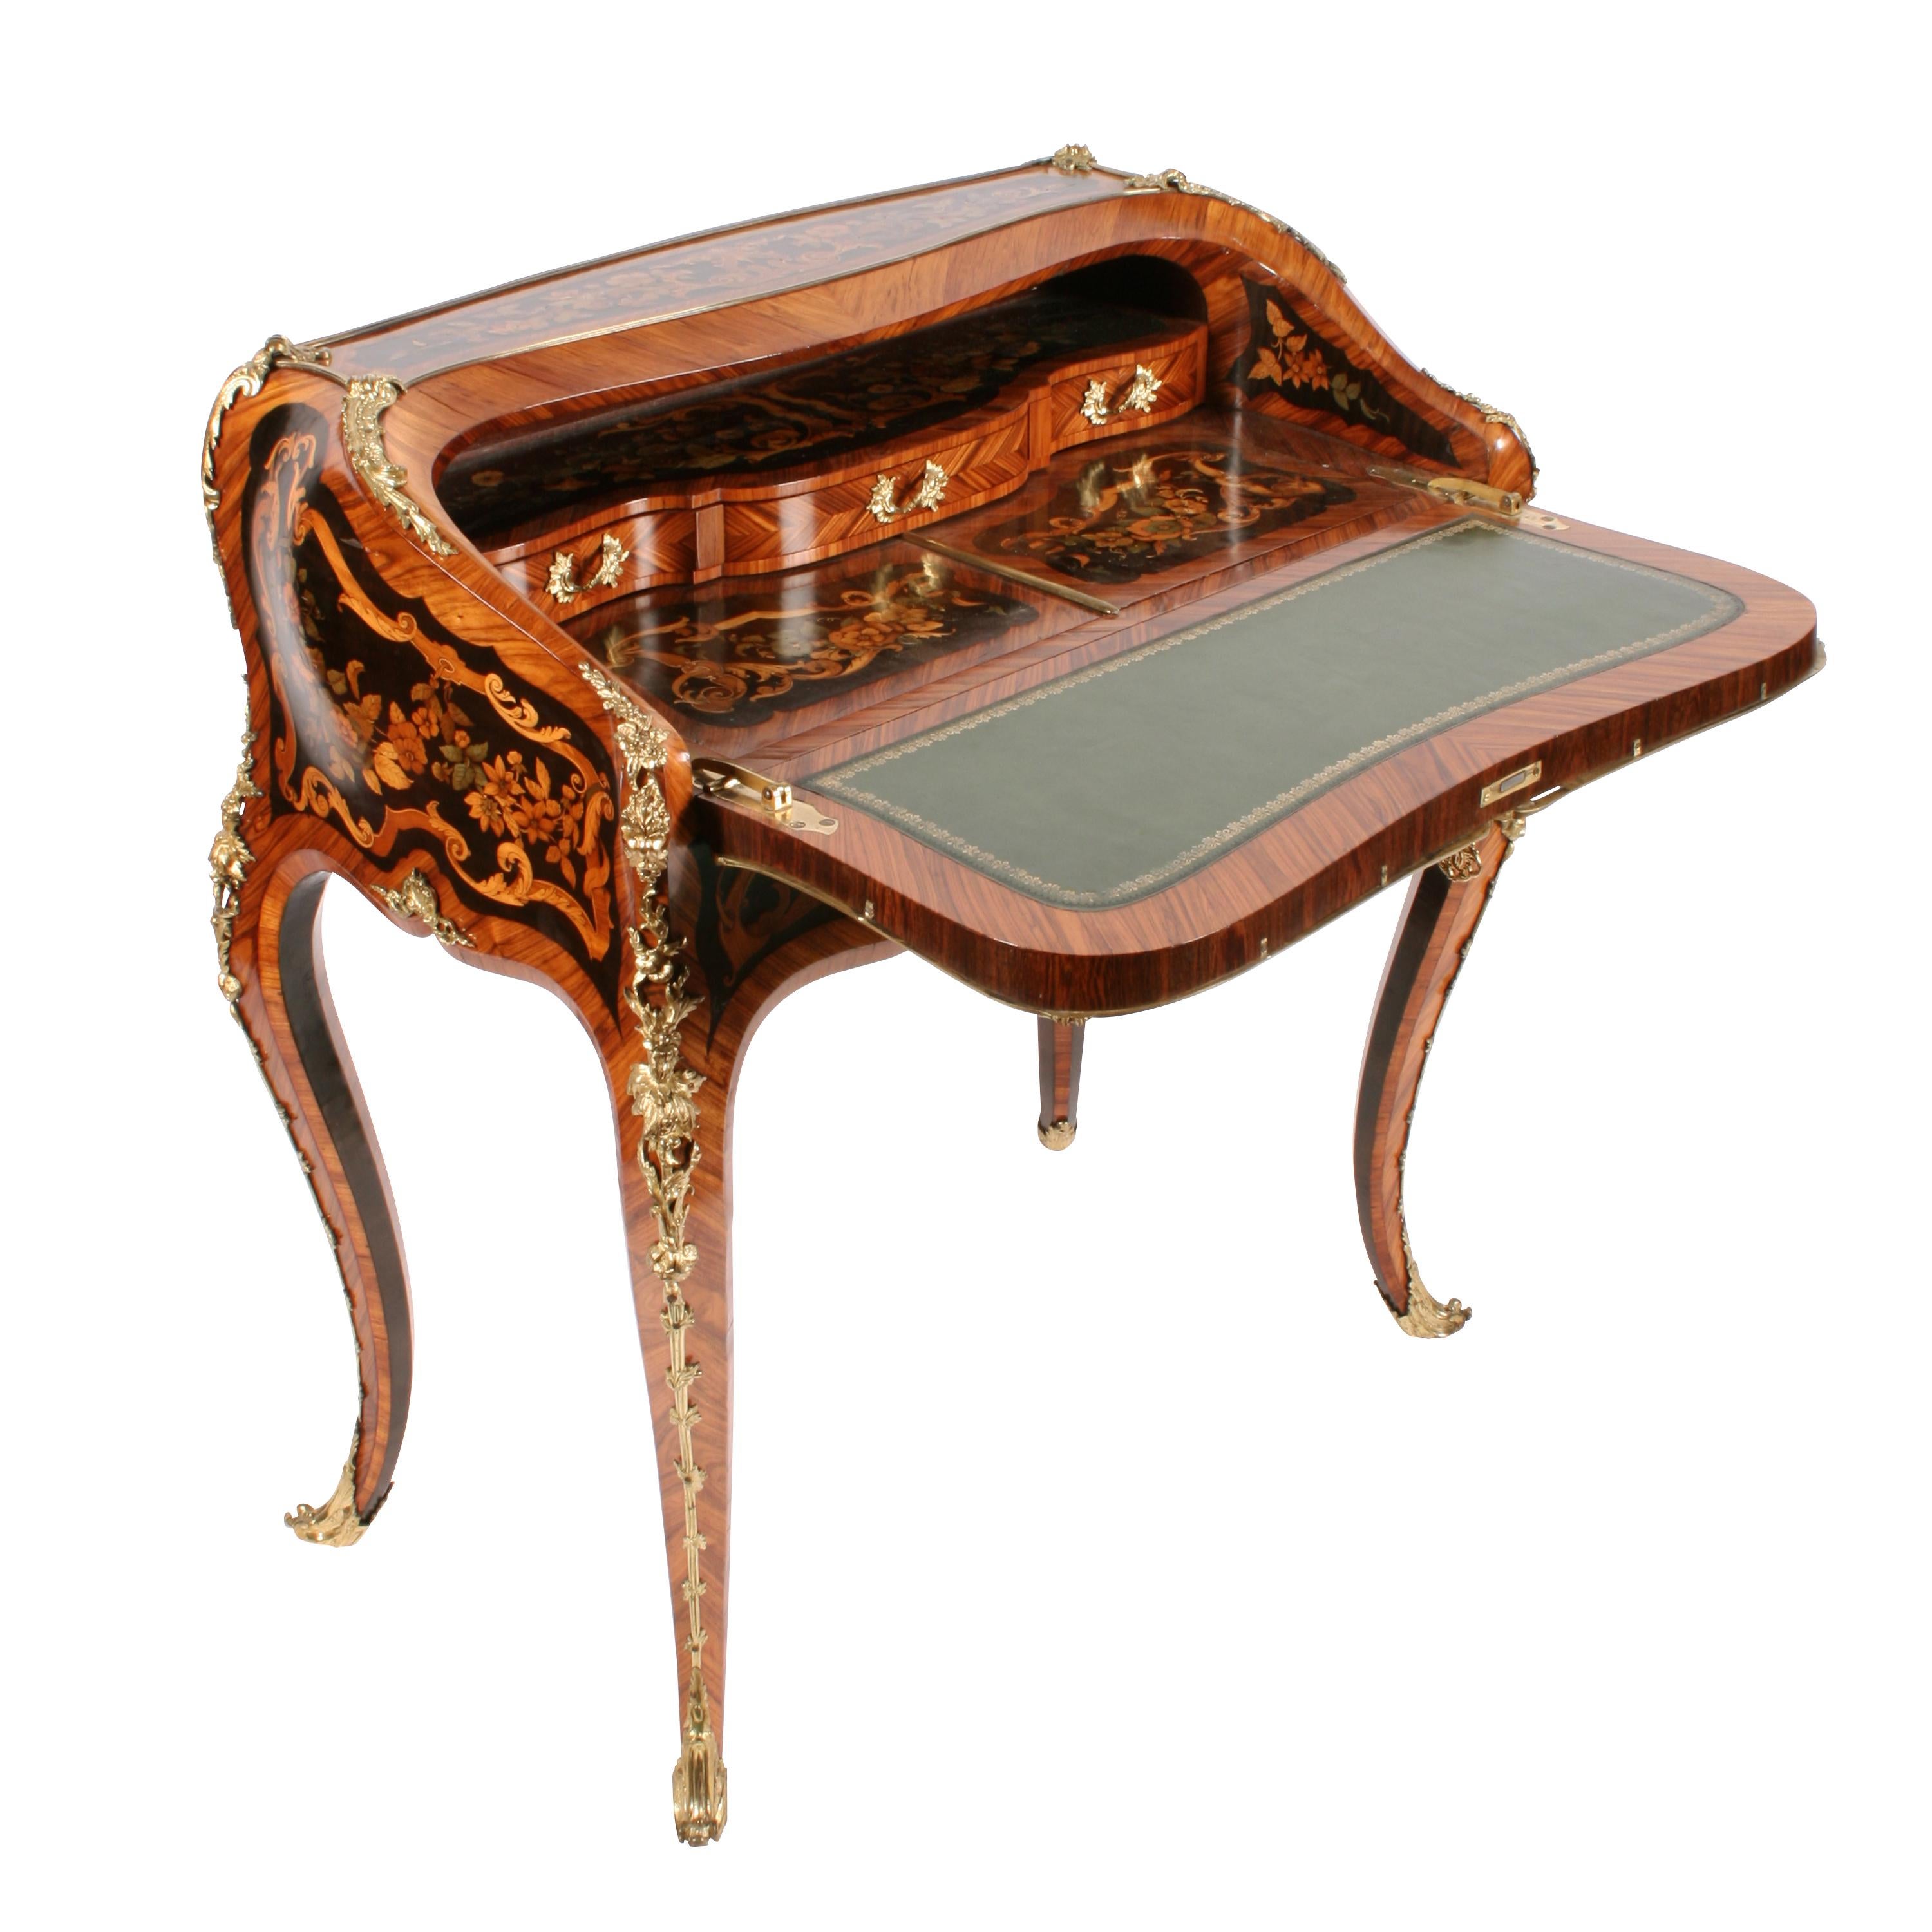 Louis XV Style Marquetry Bureau en Pente In Excellent Condition For Sale In Newcastle Upon Tyne, GB